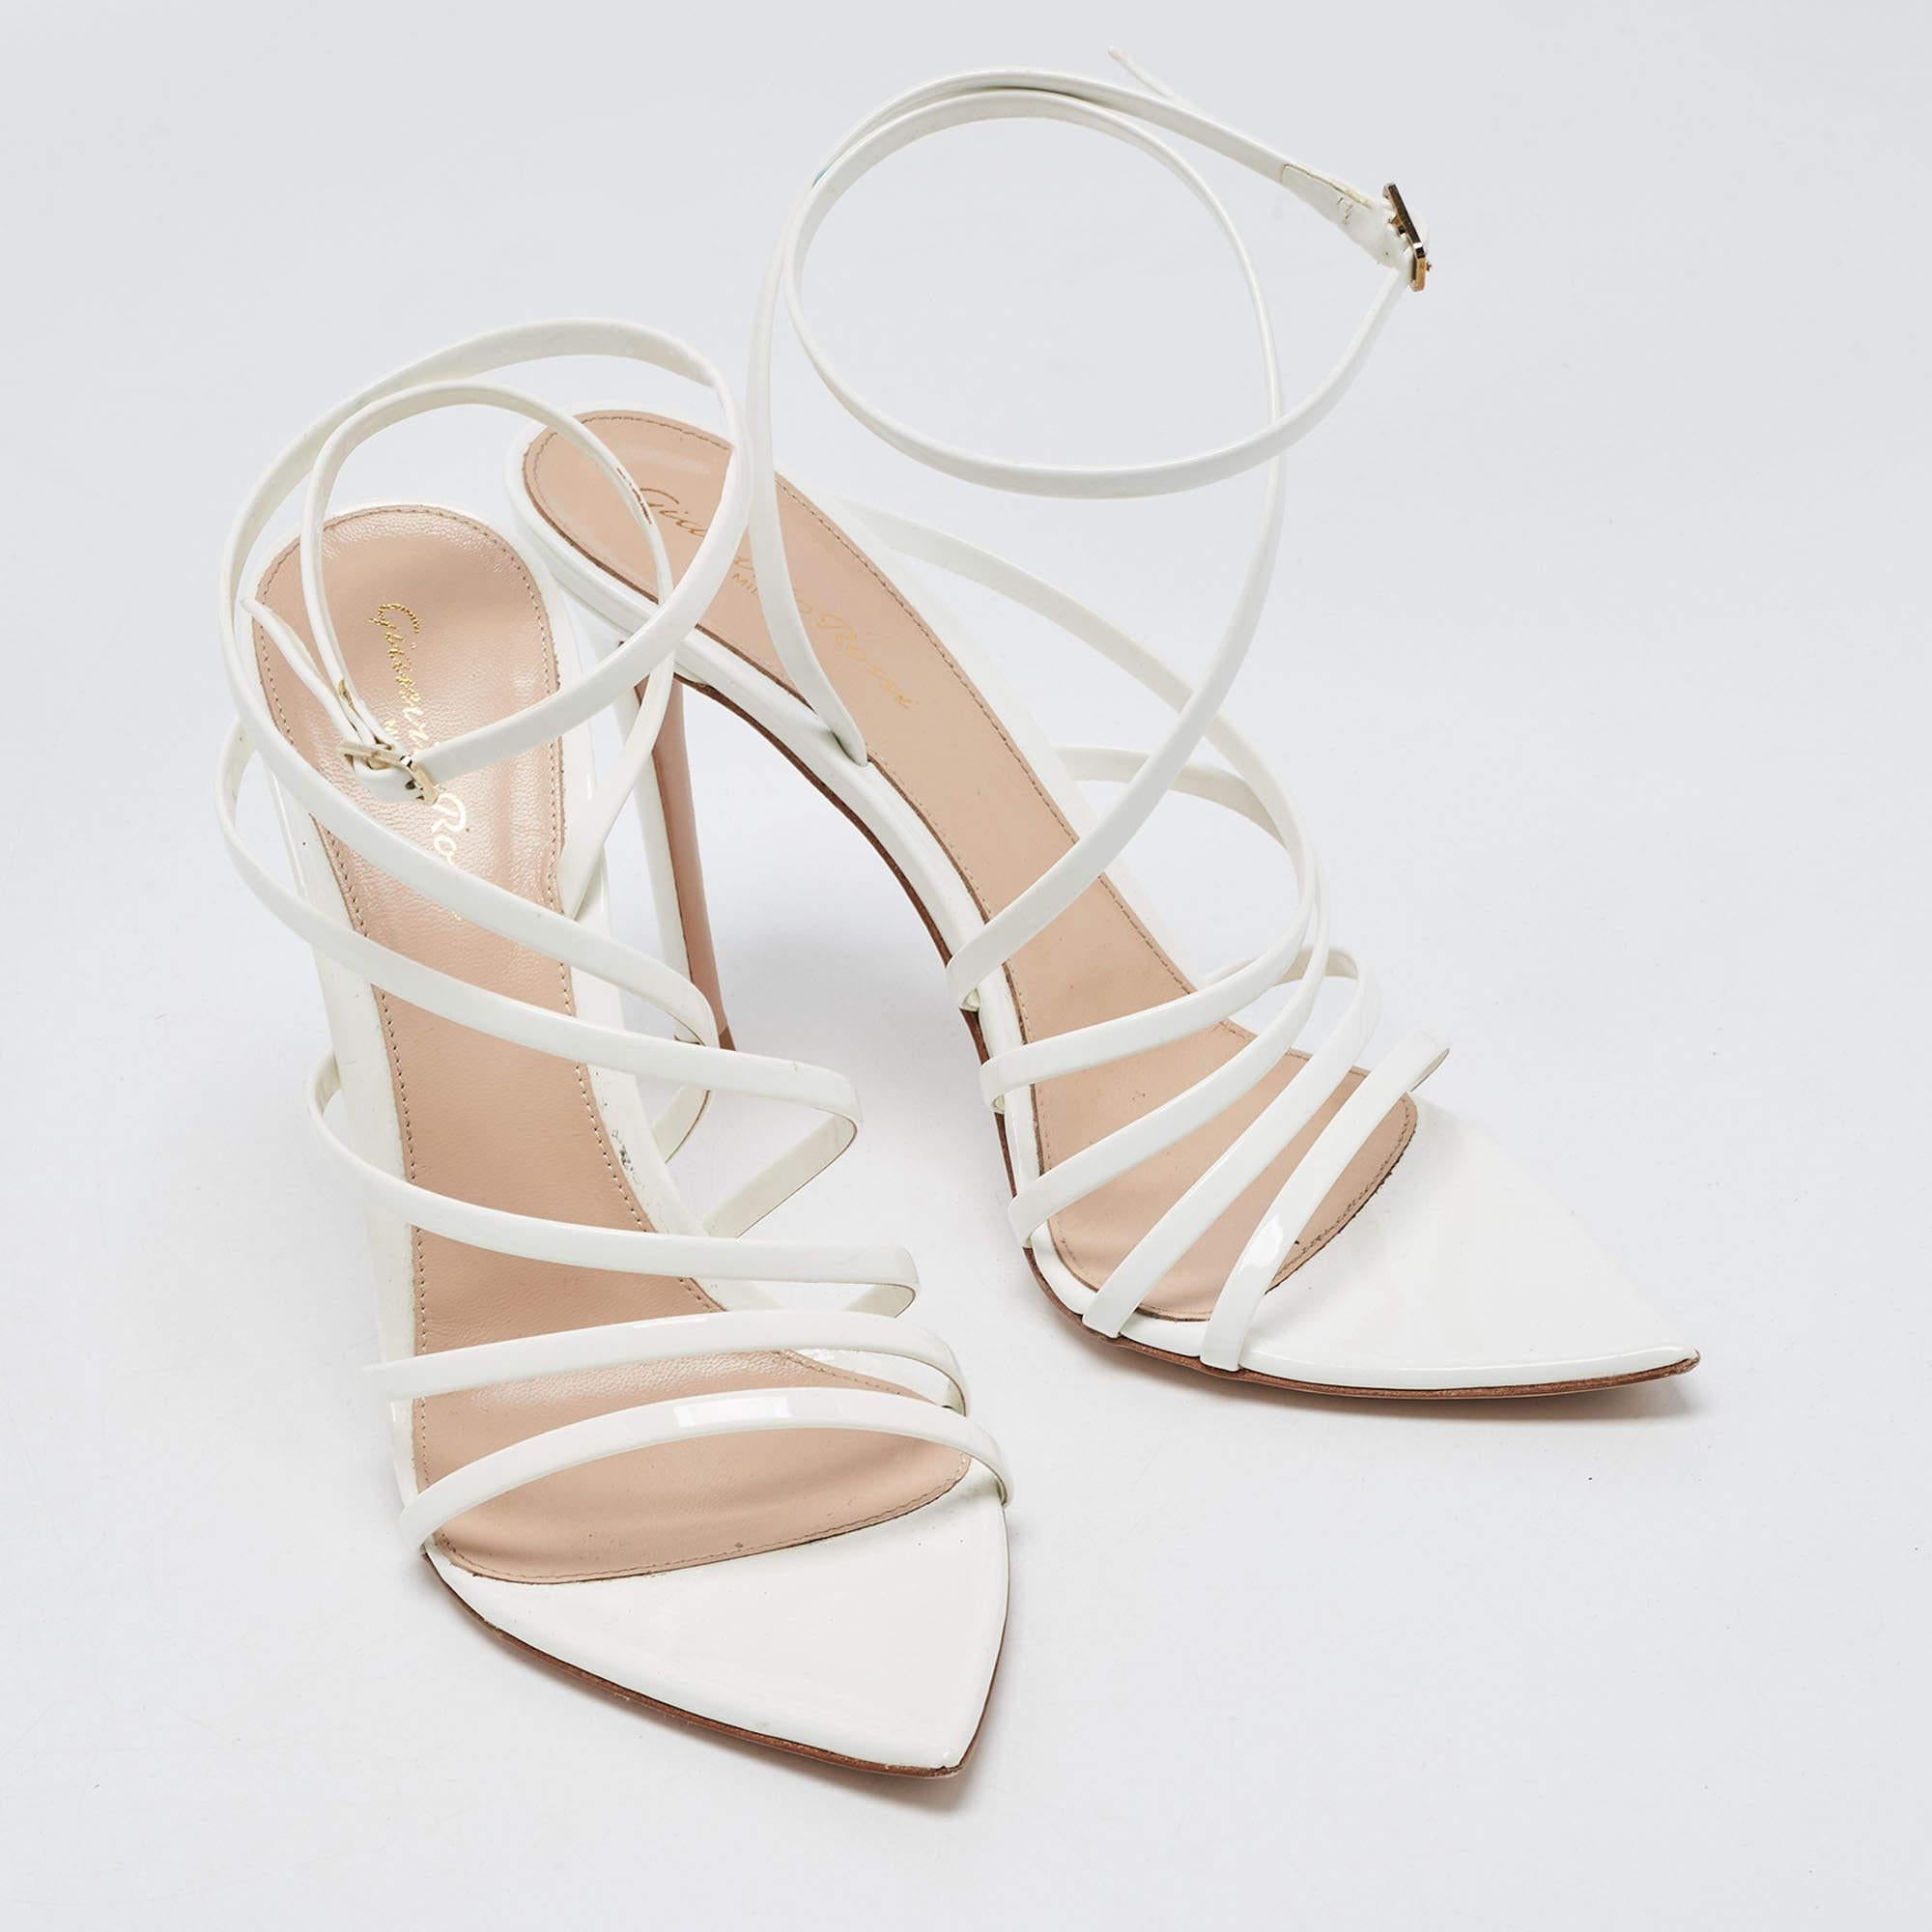 Gianvito Rossi White Patent Leather Strappy Ankle Wrap Sandals Size 39 1